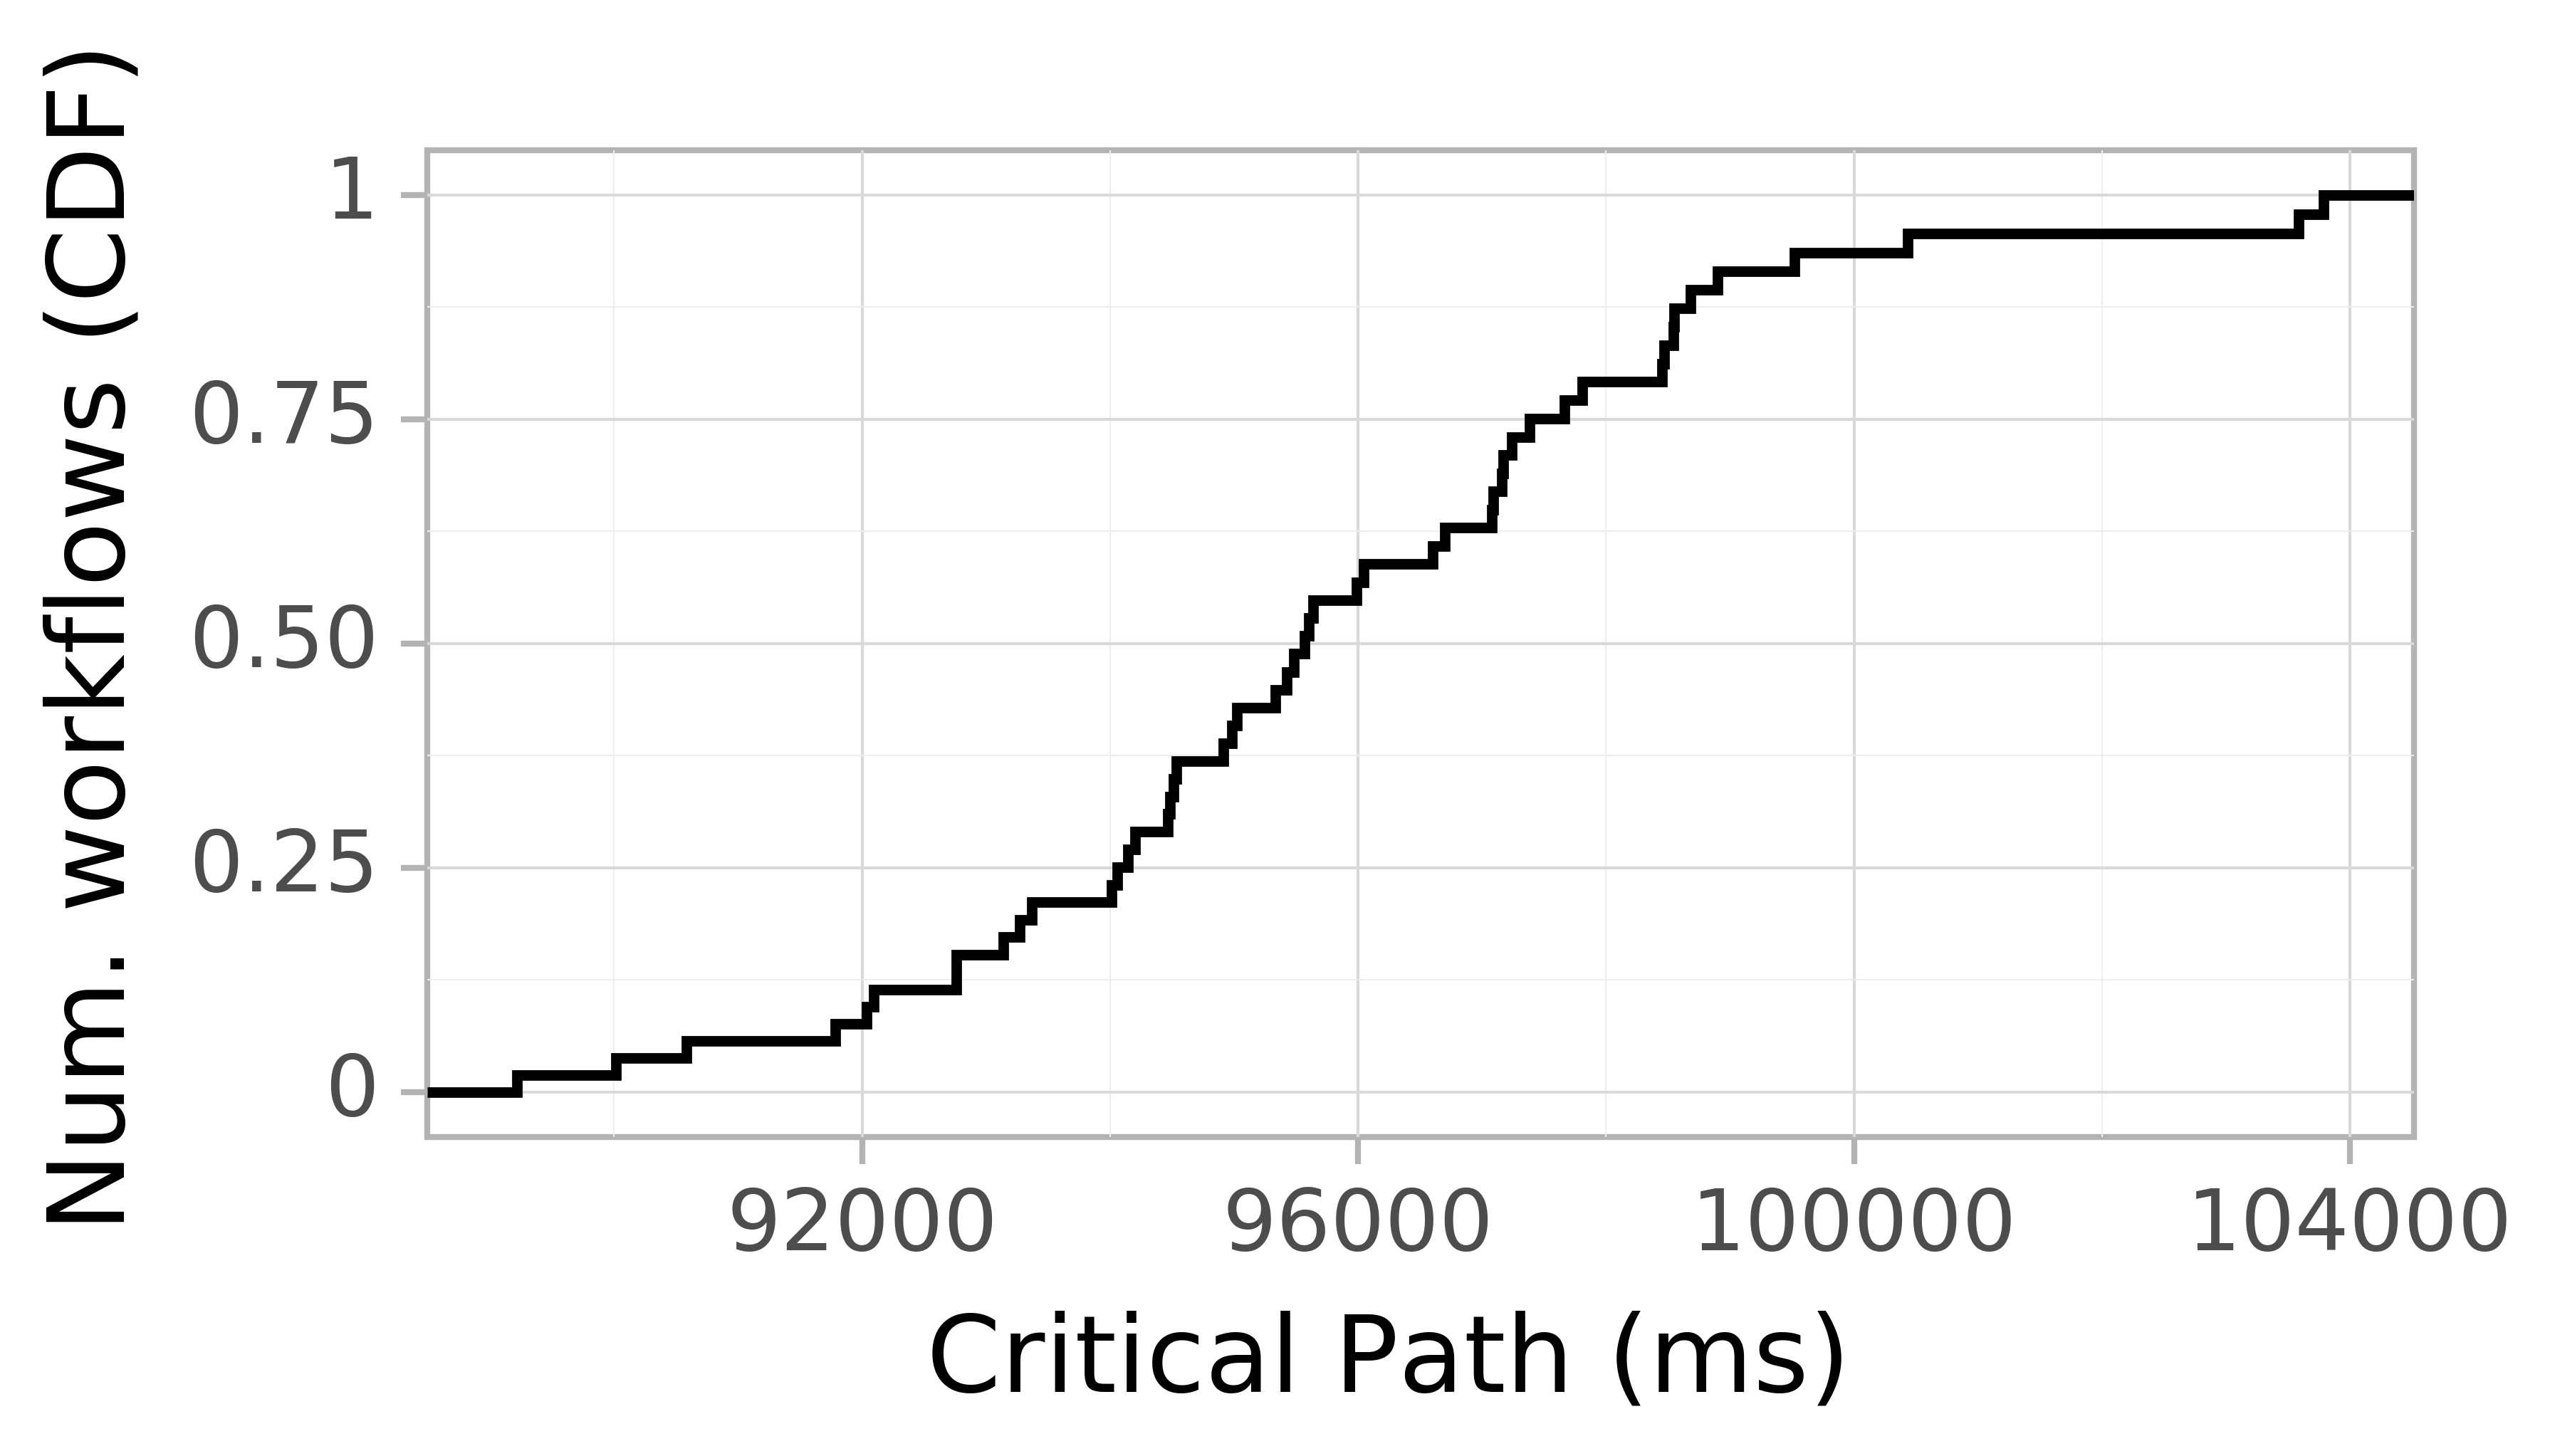 Job runtime CDF graph for the askalon-new_ee45 trace.